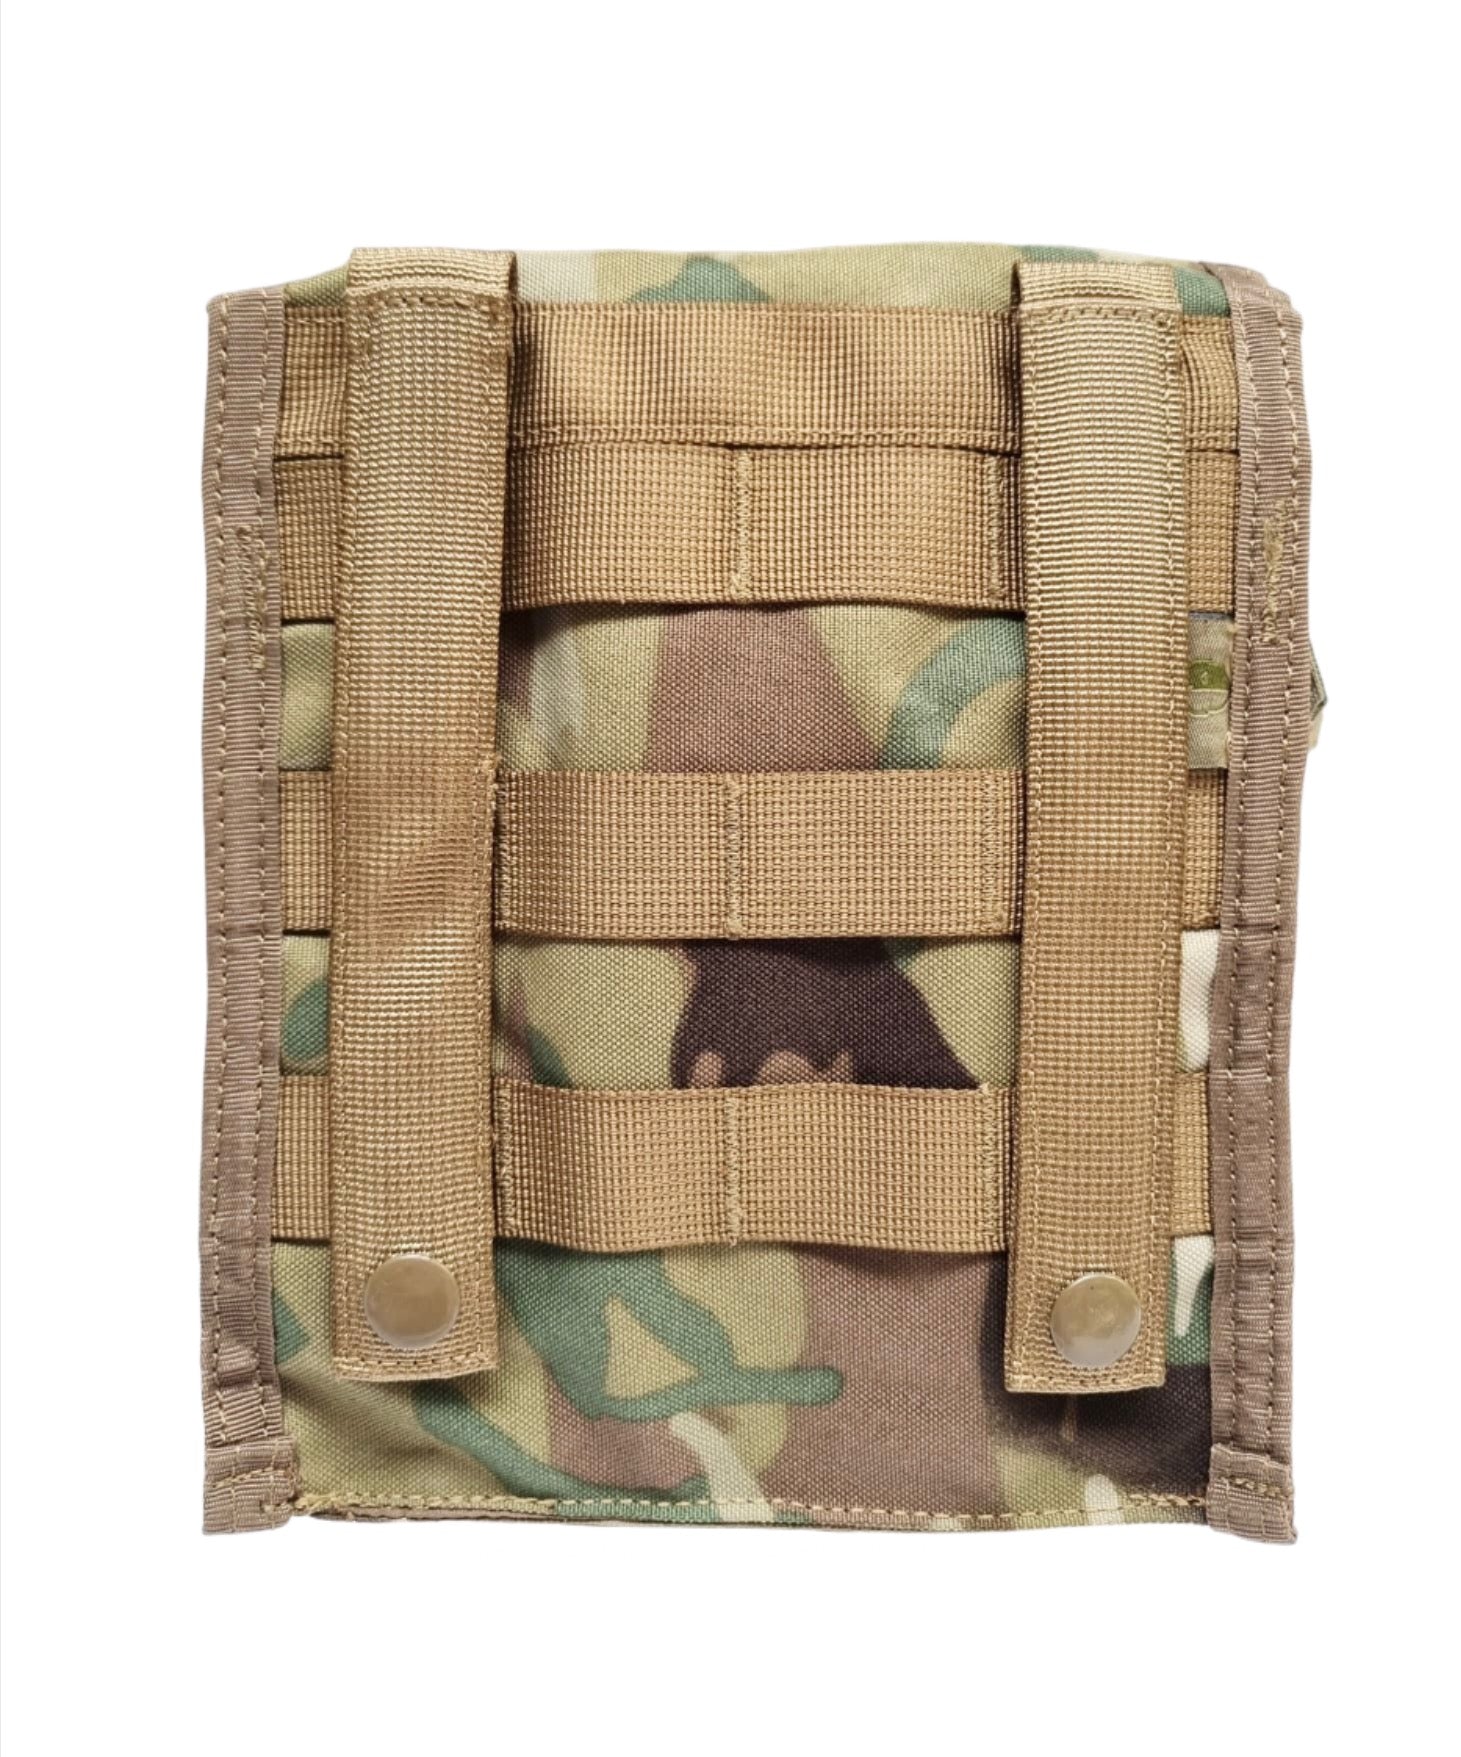 SHE-942 LMG / SAW Camouflage Pouch Colour UTP backside view.